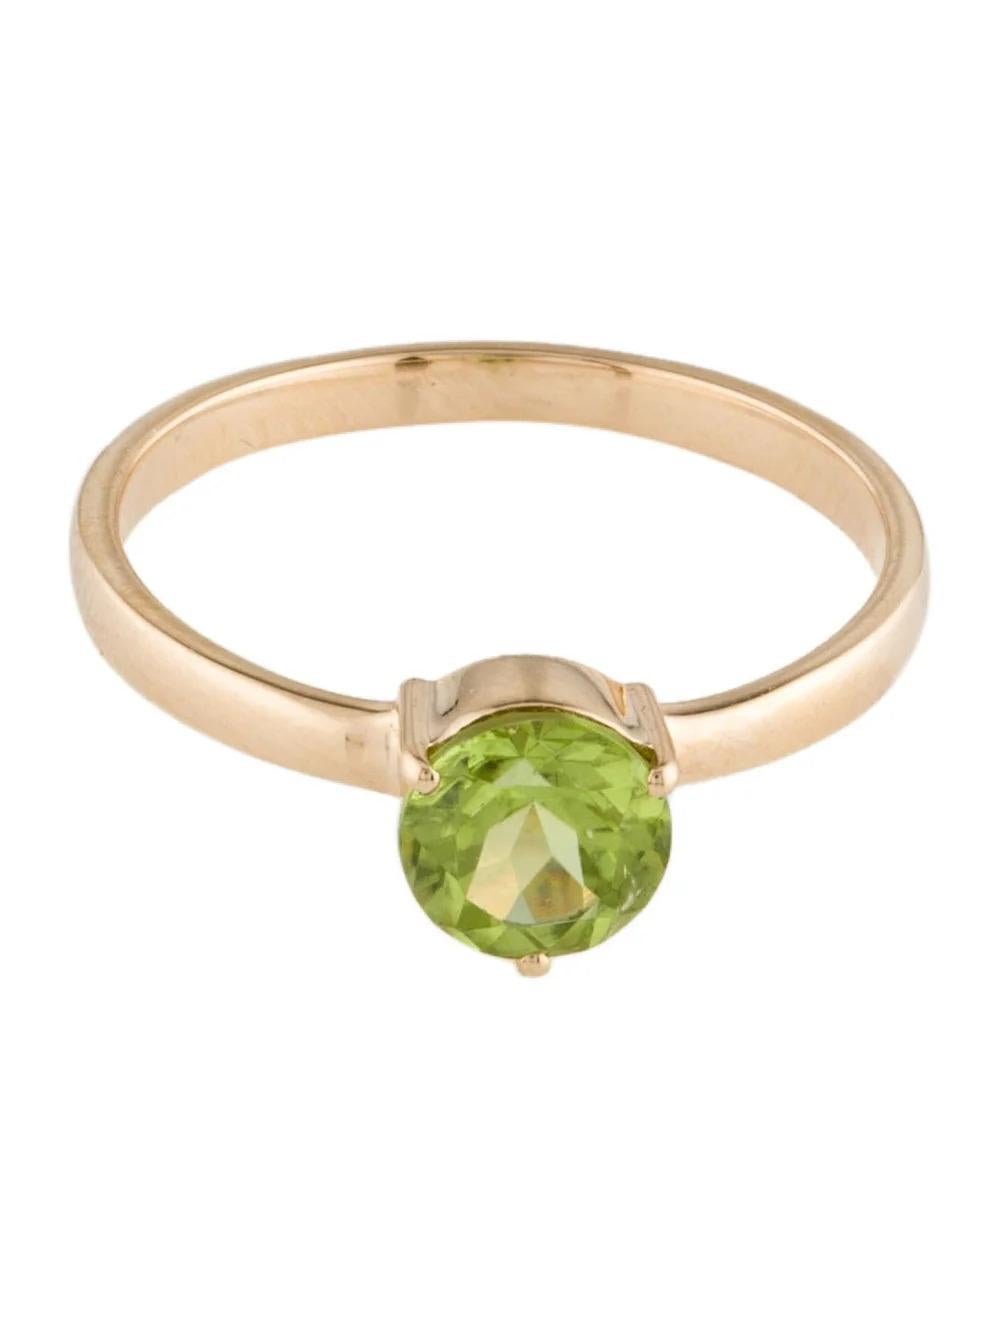 Round Cut Vintage 14K Peridot Solitaire Cocktail Ring, Size 7 - Green Gemstone Jewelry For Sale